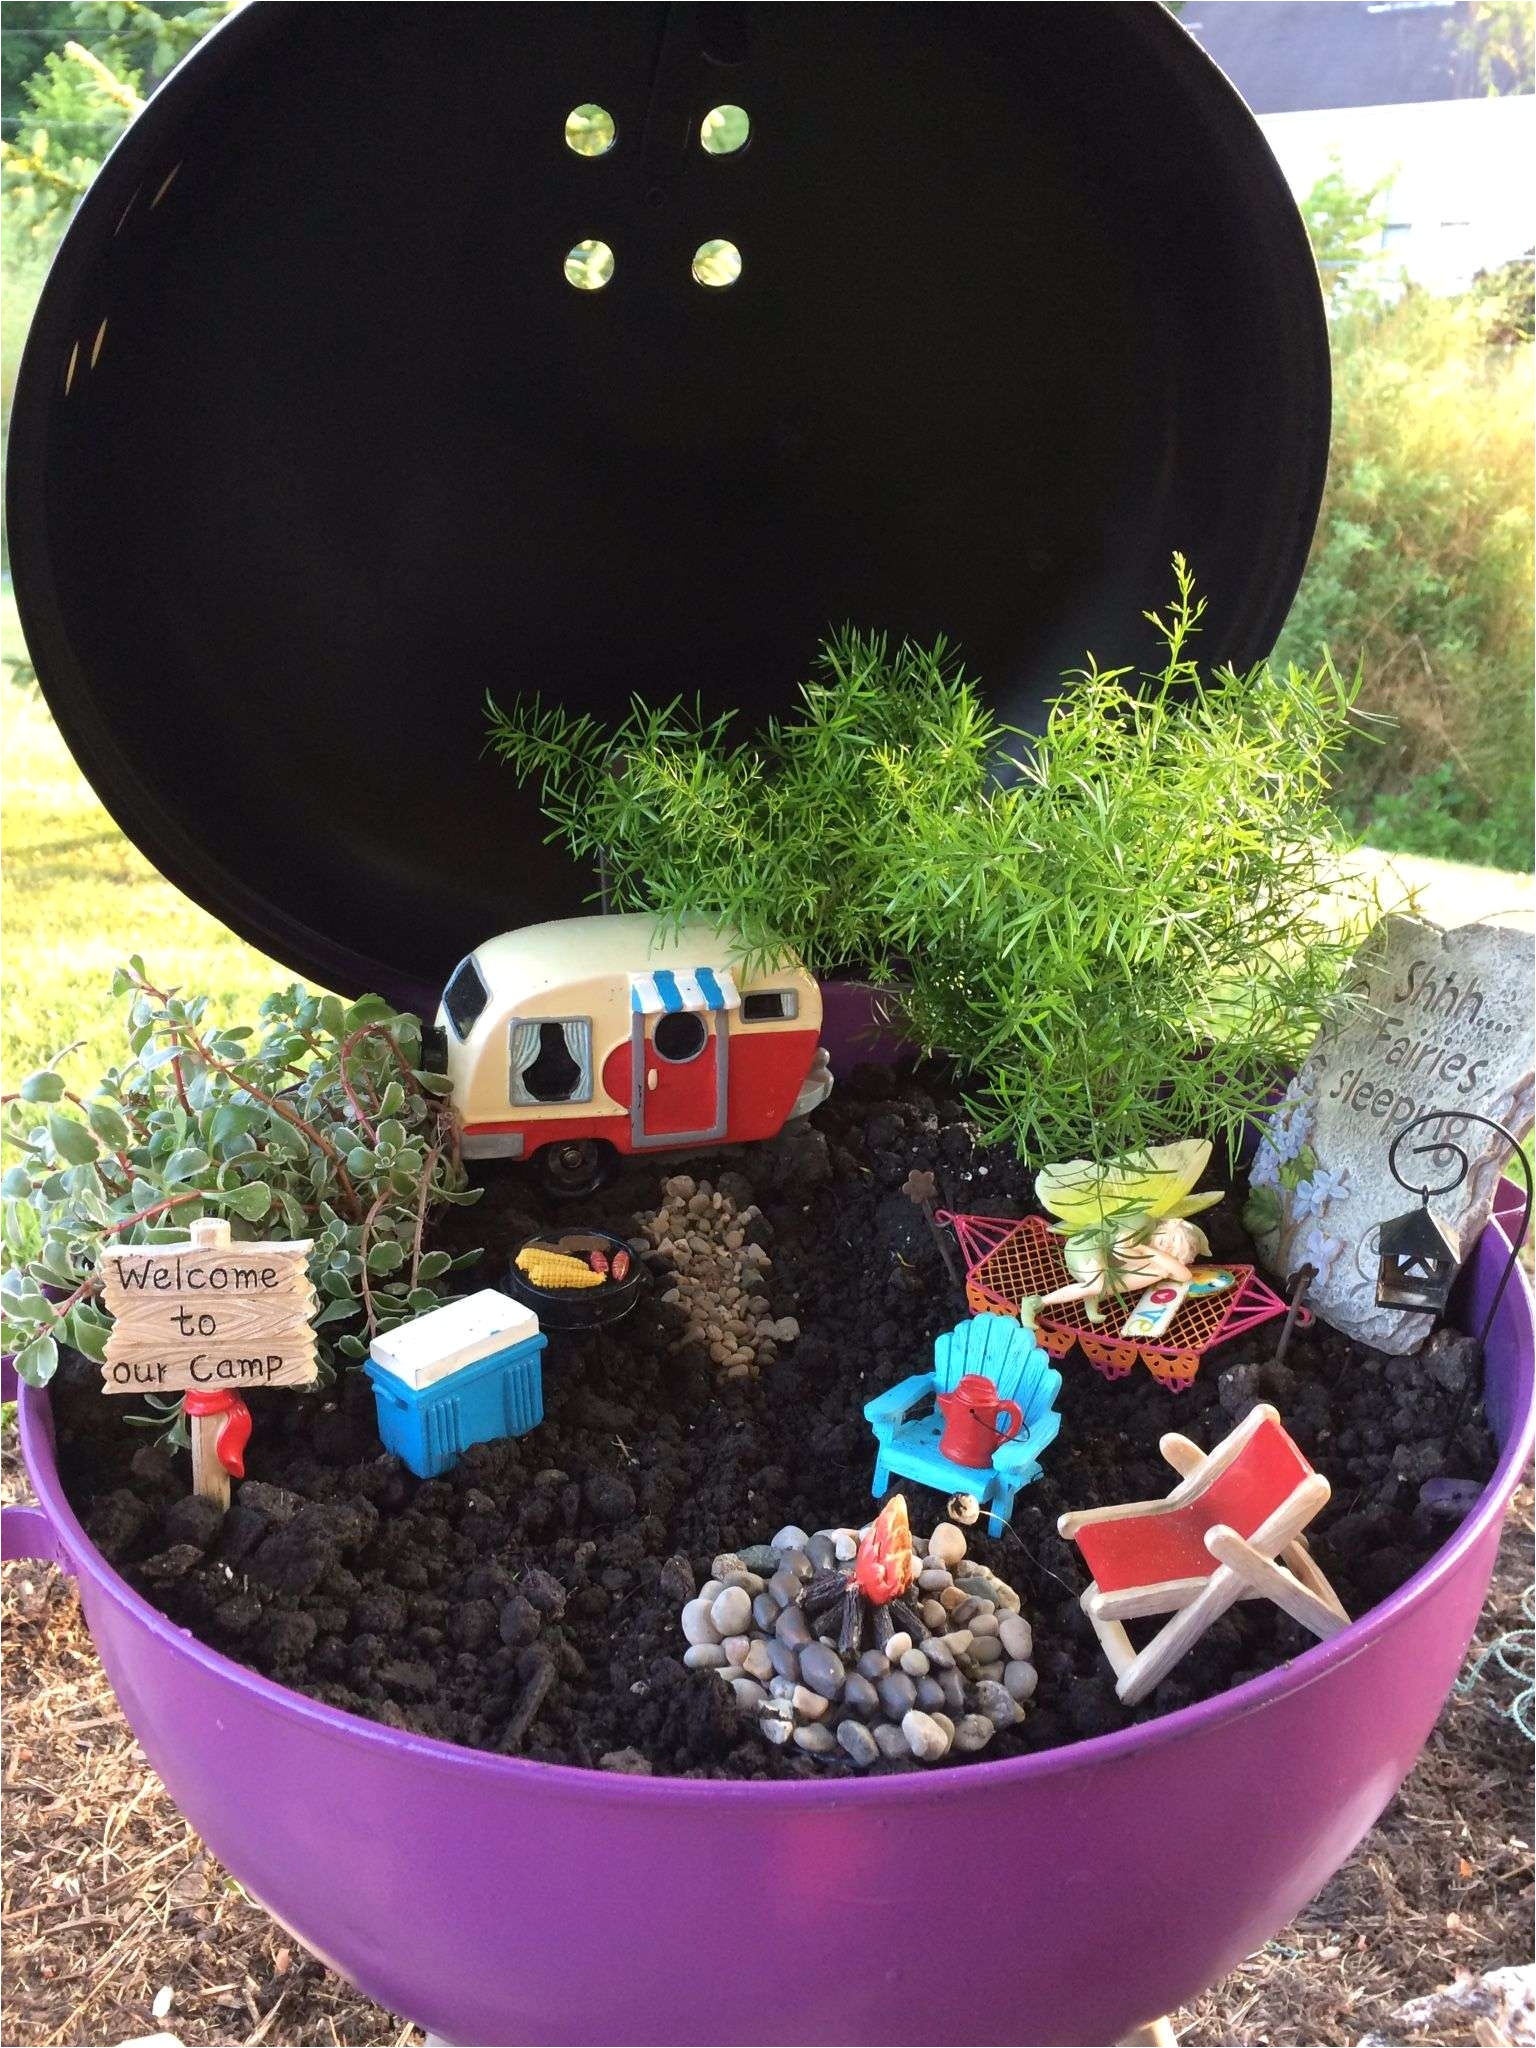 mickey mouse garden decor ideas painted an old charcoal grill to create the perfect place for a fairy campground plete